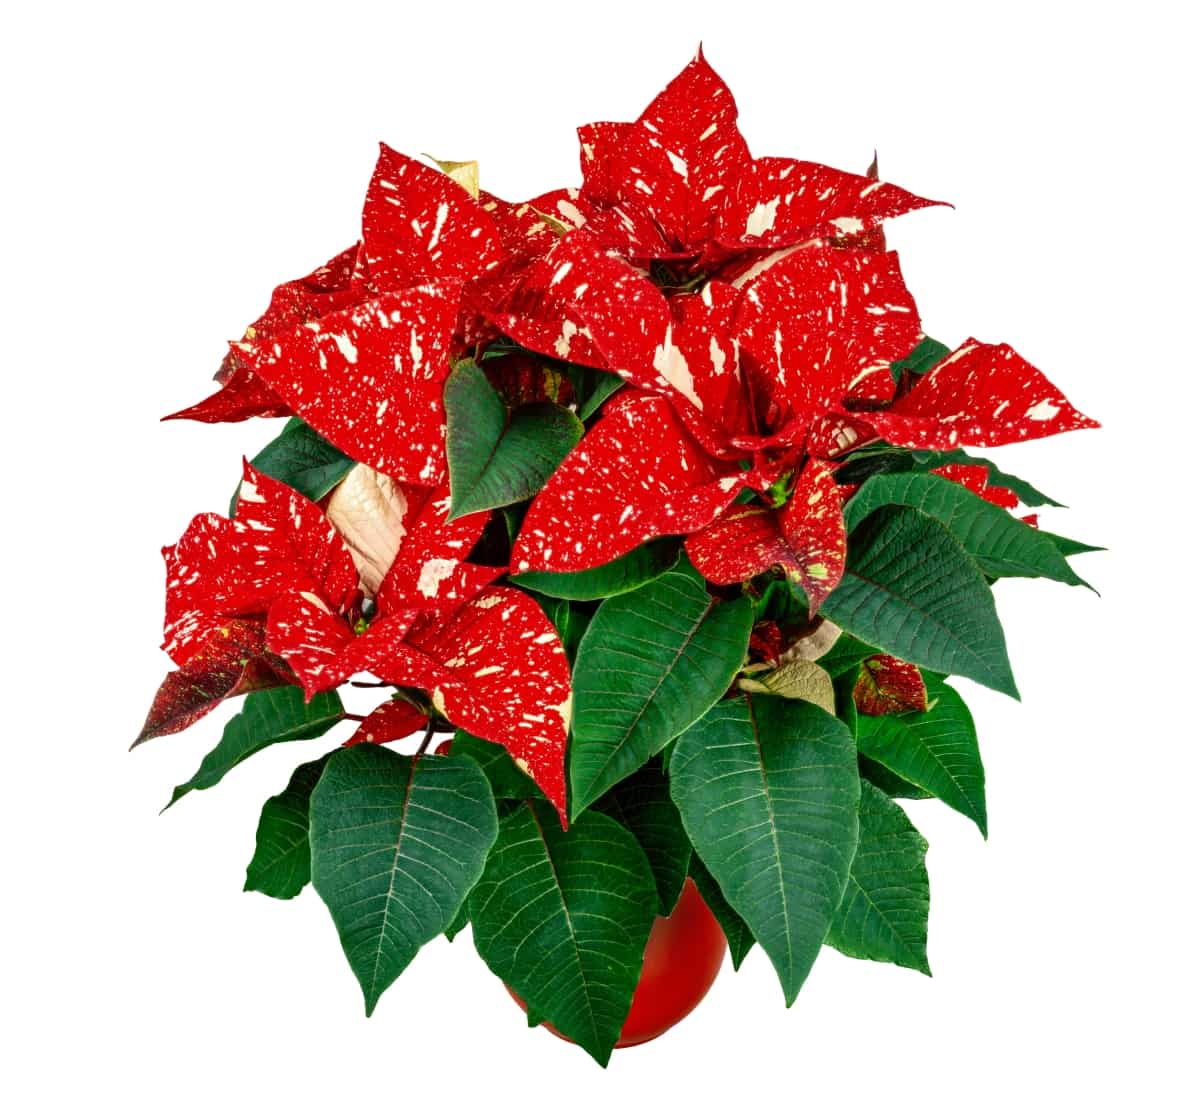 Potted Poinsettia Flower